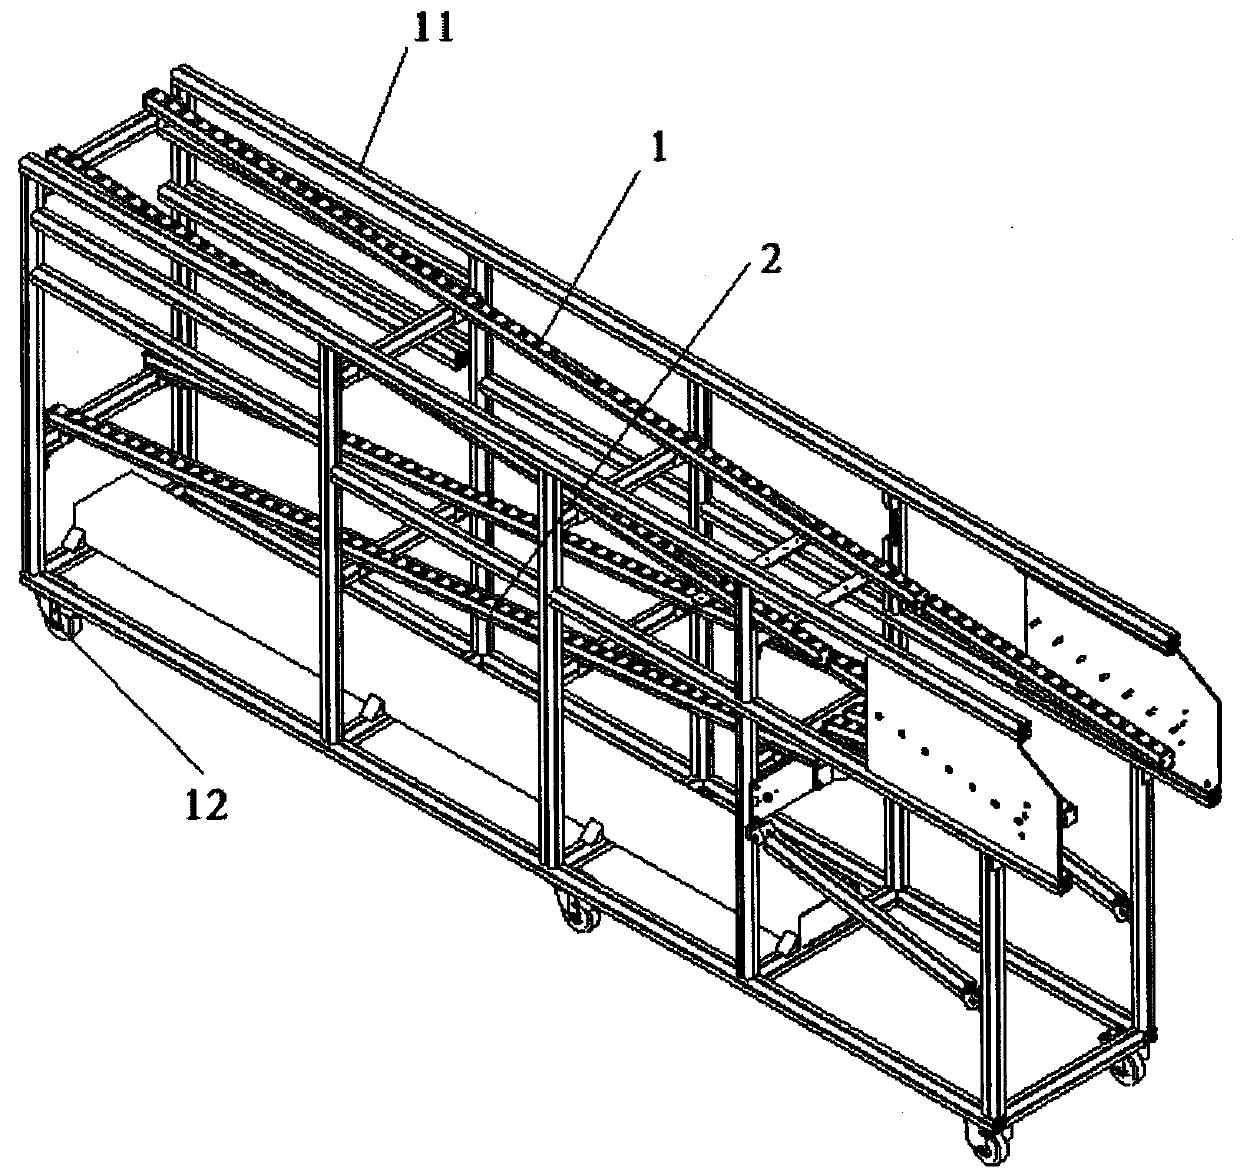 A dynamic material rack system at the edge of the line